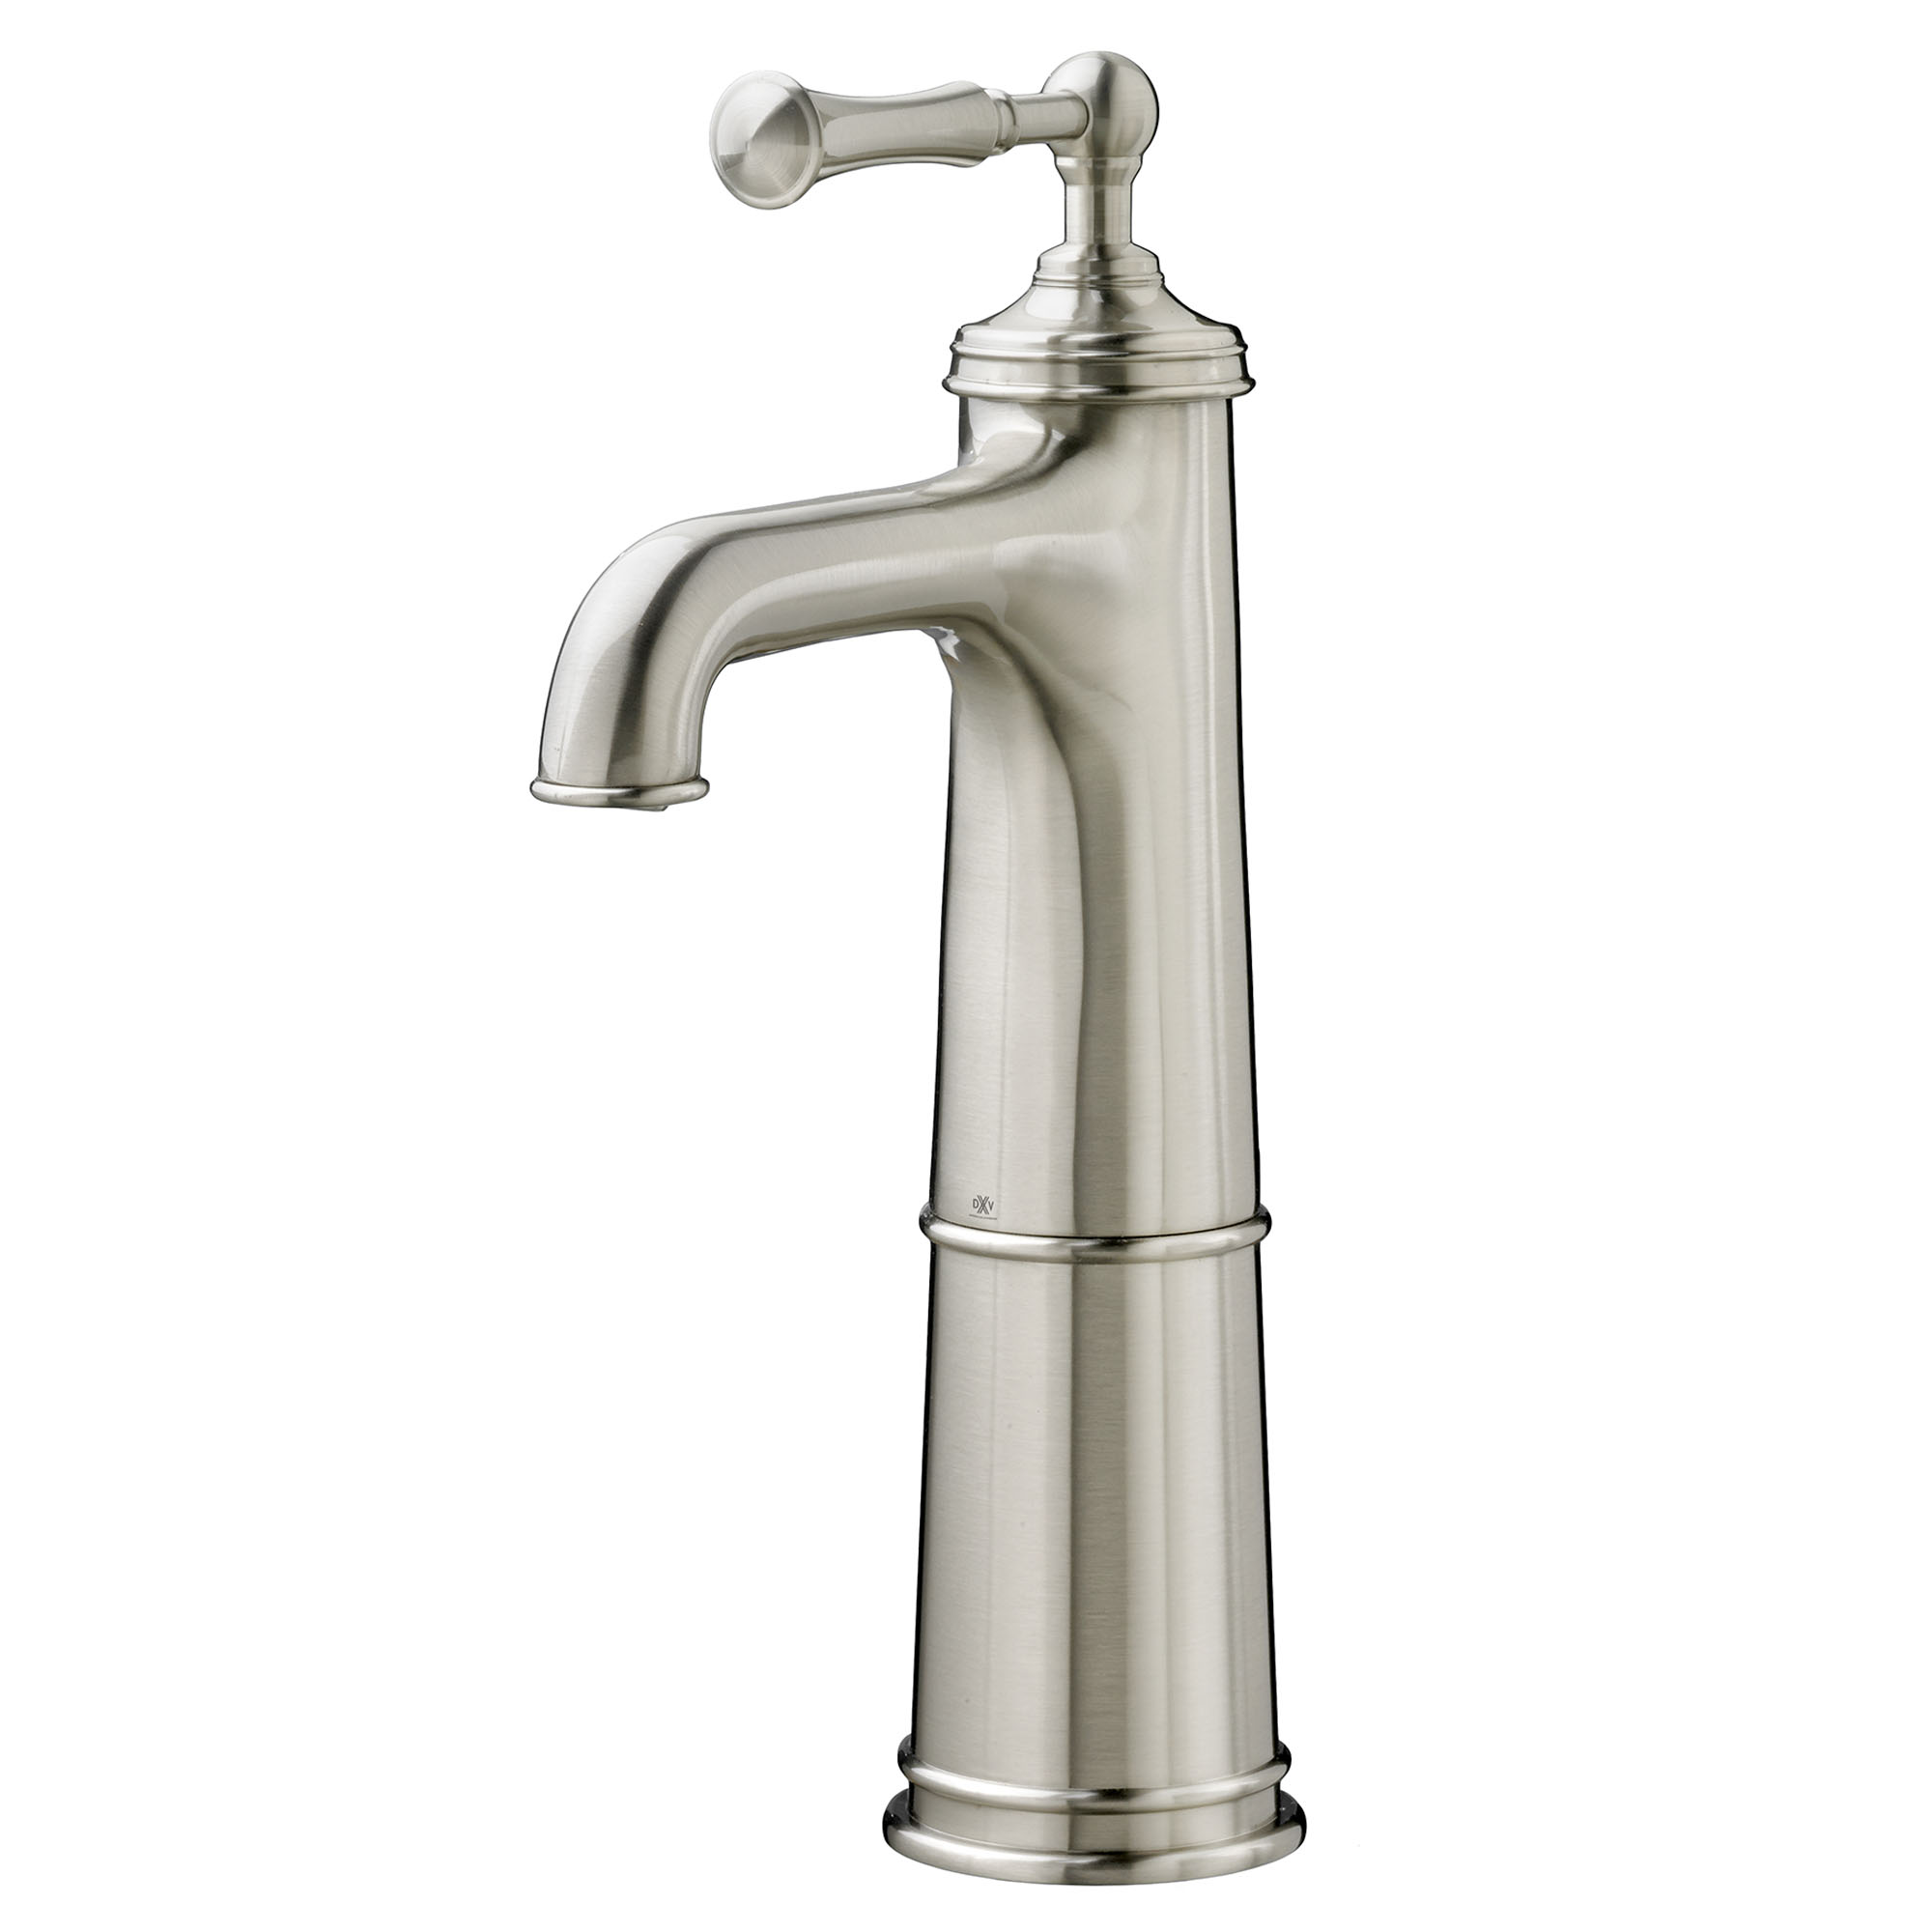 Vessel Faucet With Drain,